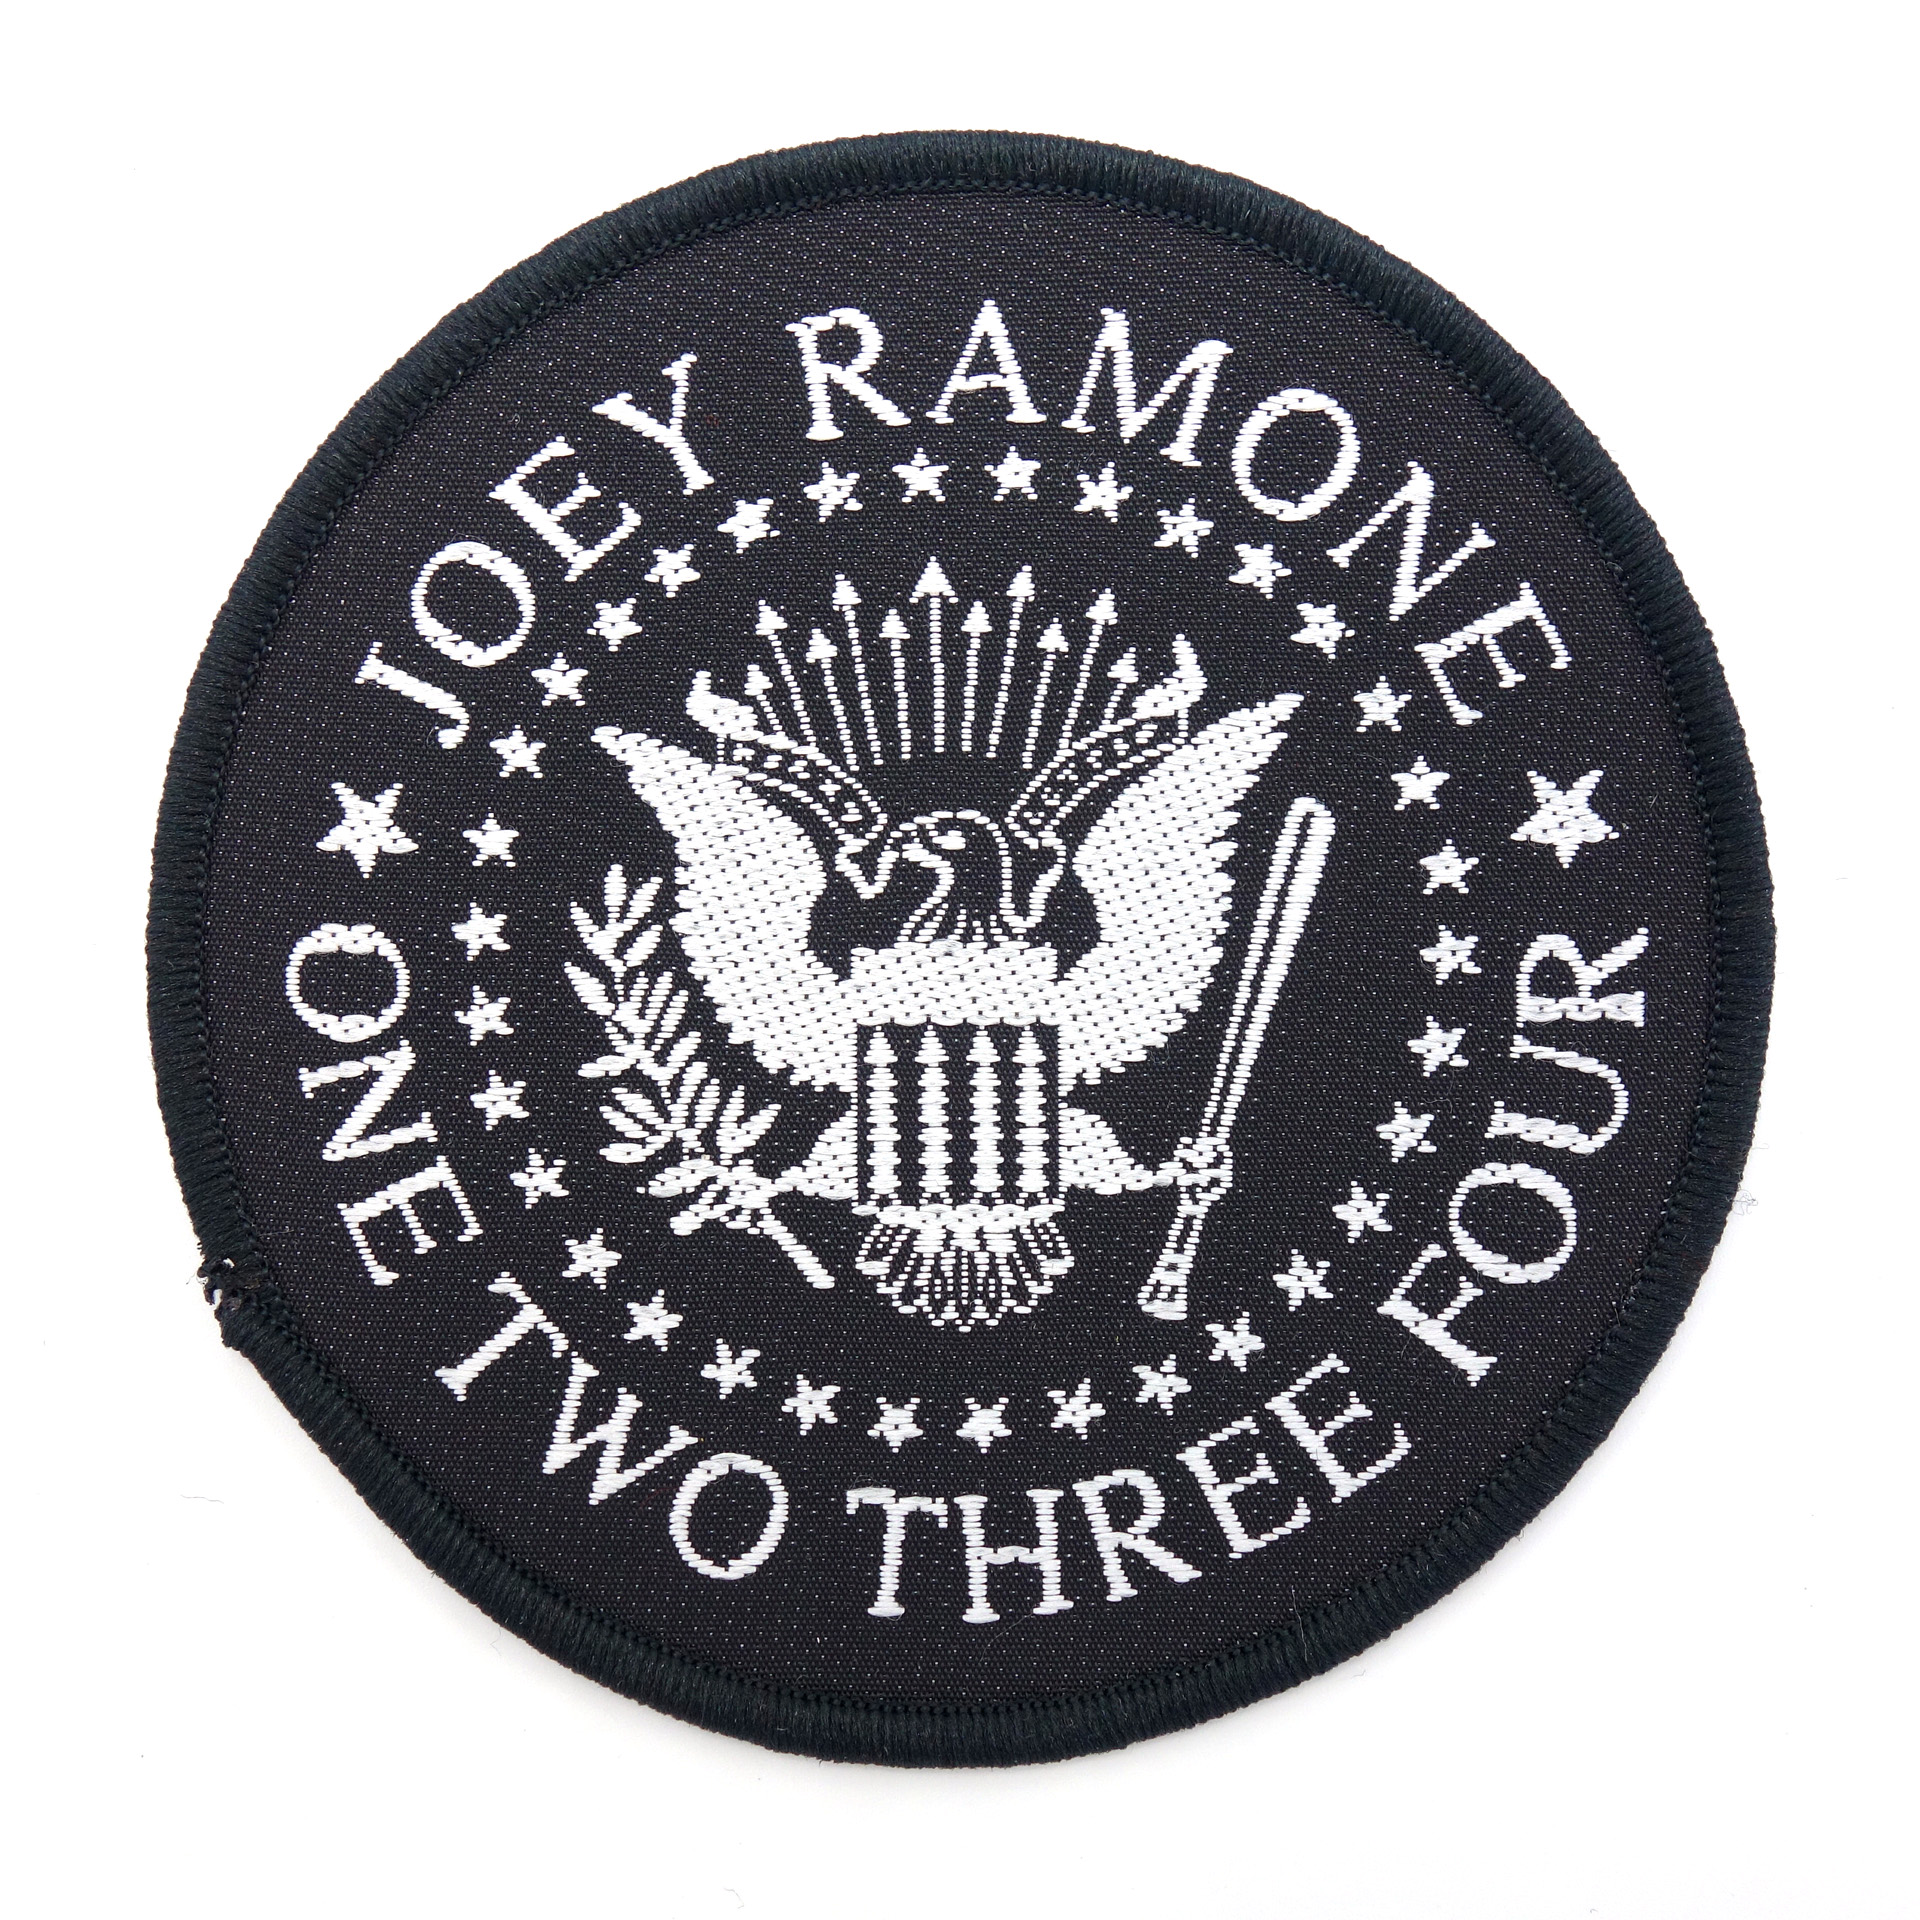 Band Patch Joey Ramone One Two Three Four The Ramones Aufnäher